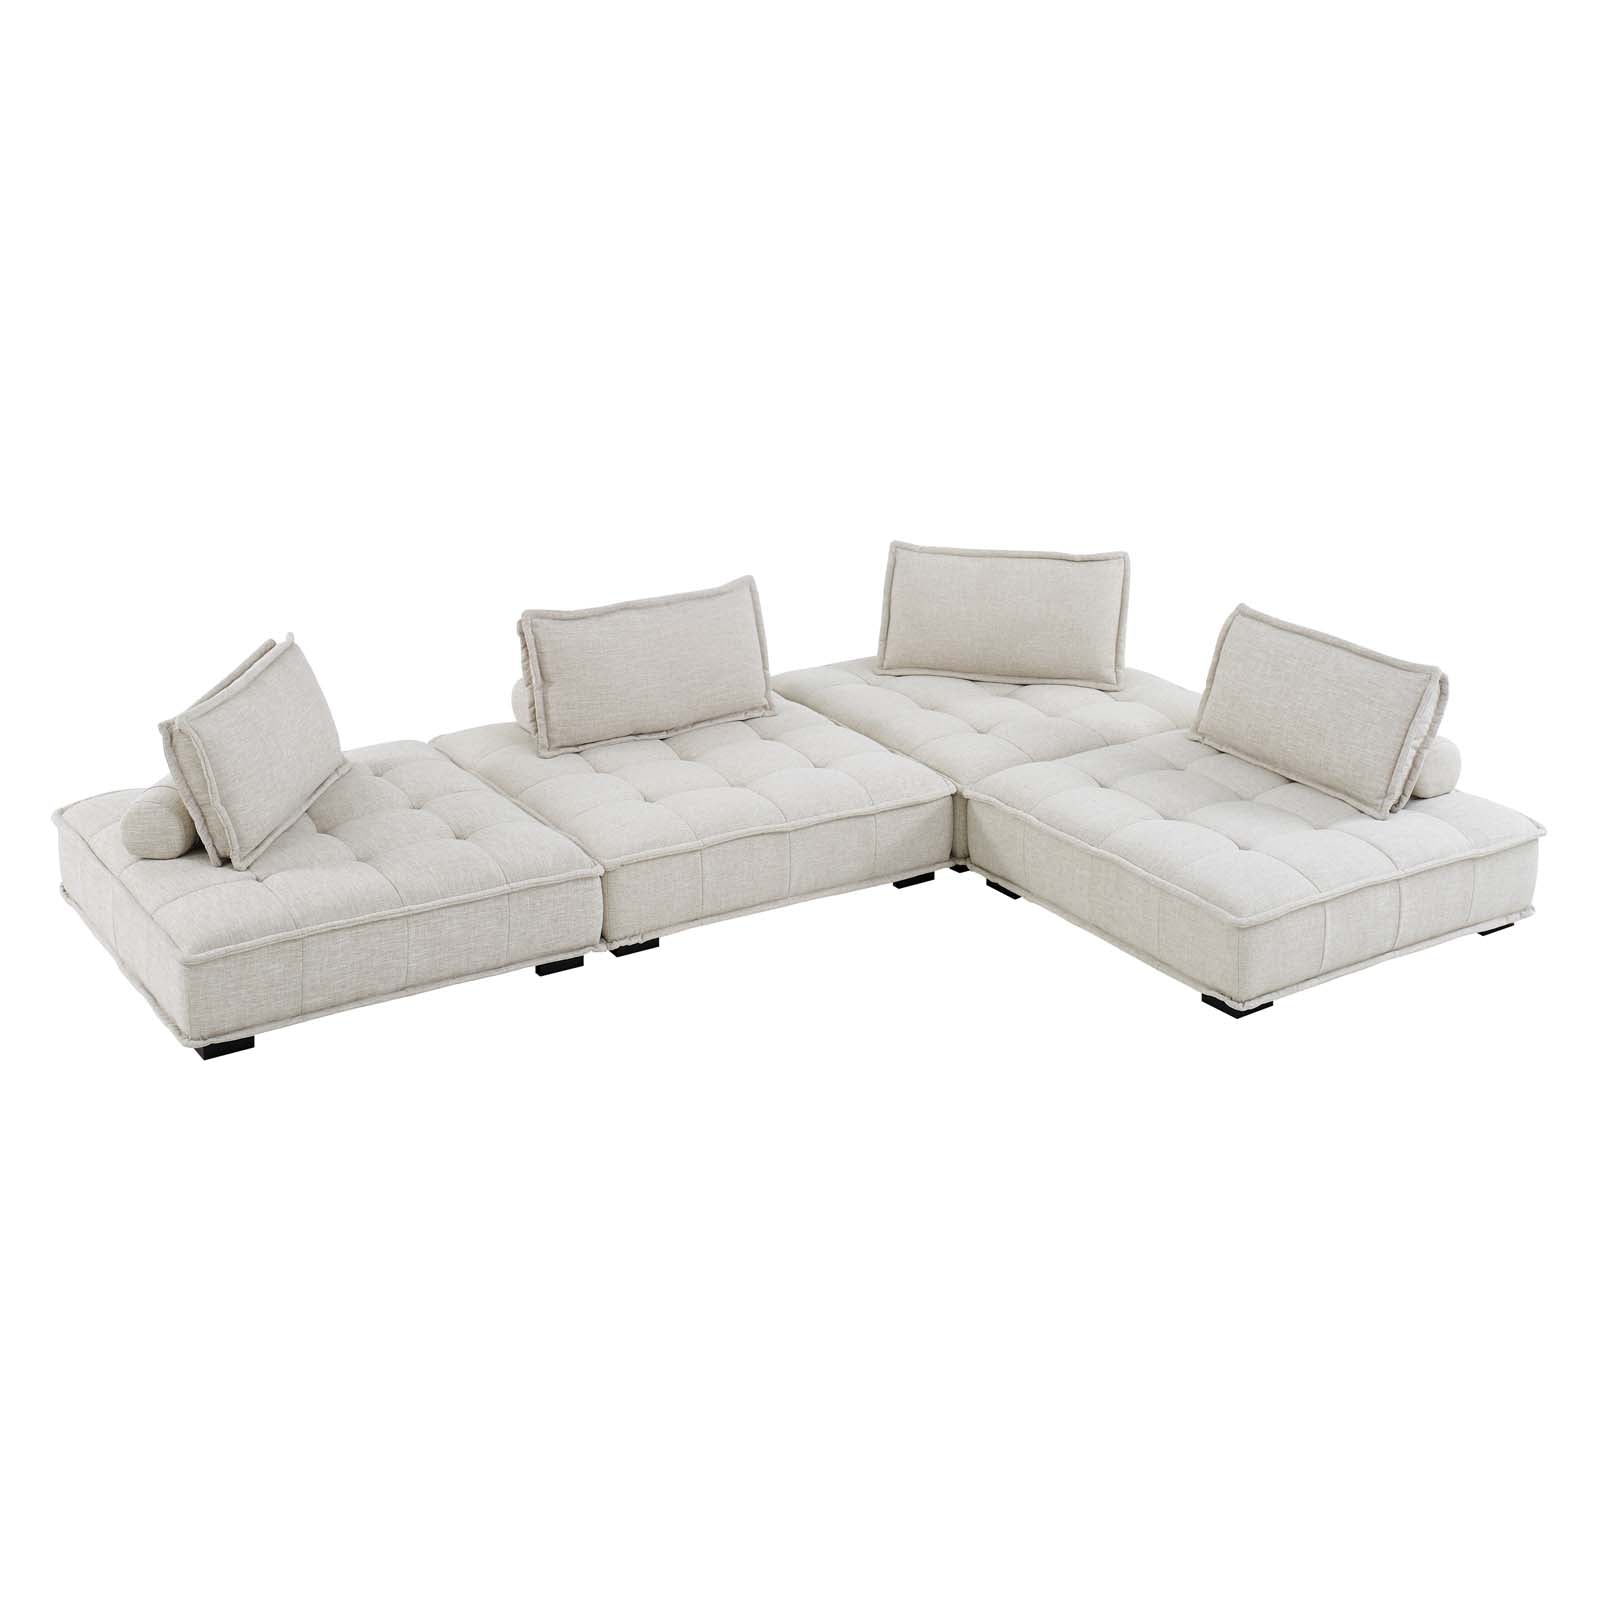 Modway Sectional Sofas - Saunter-Tufted-Fabric-Fabric-4-Piece-Sectional-Sofa-Beige